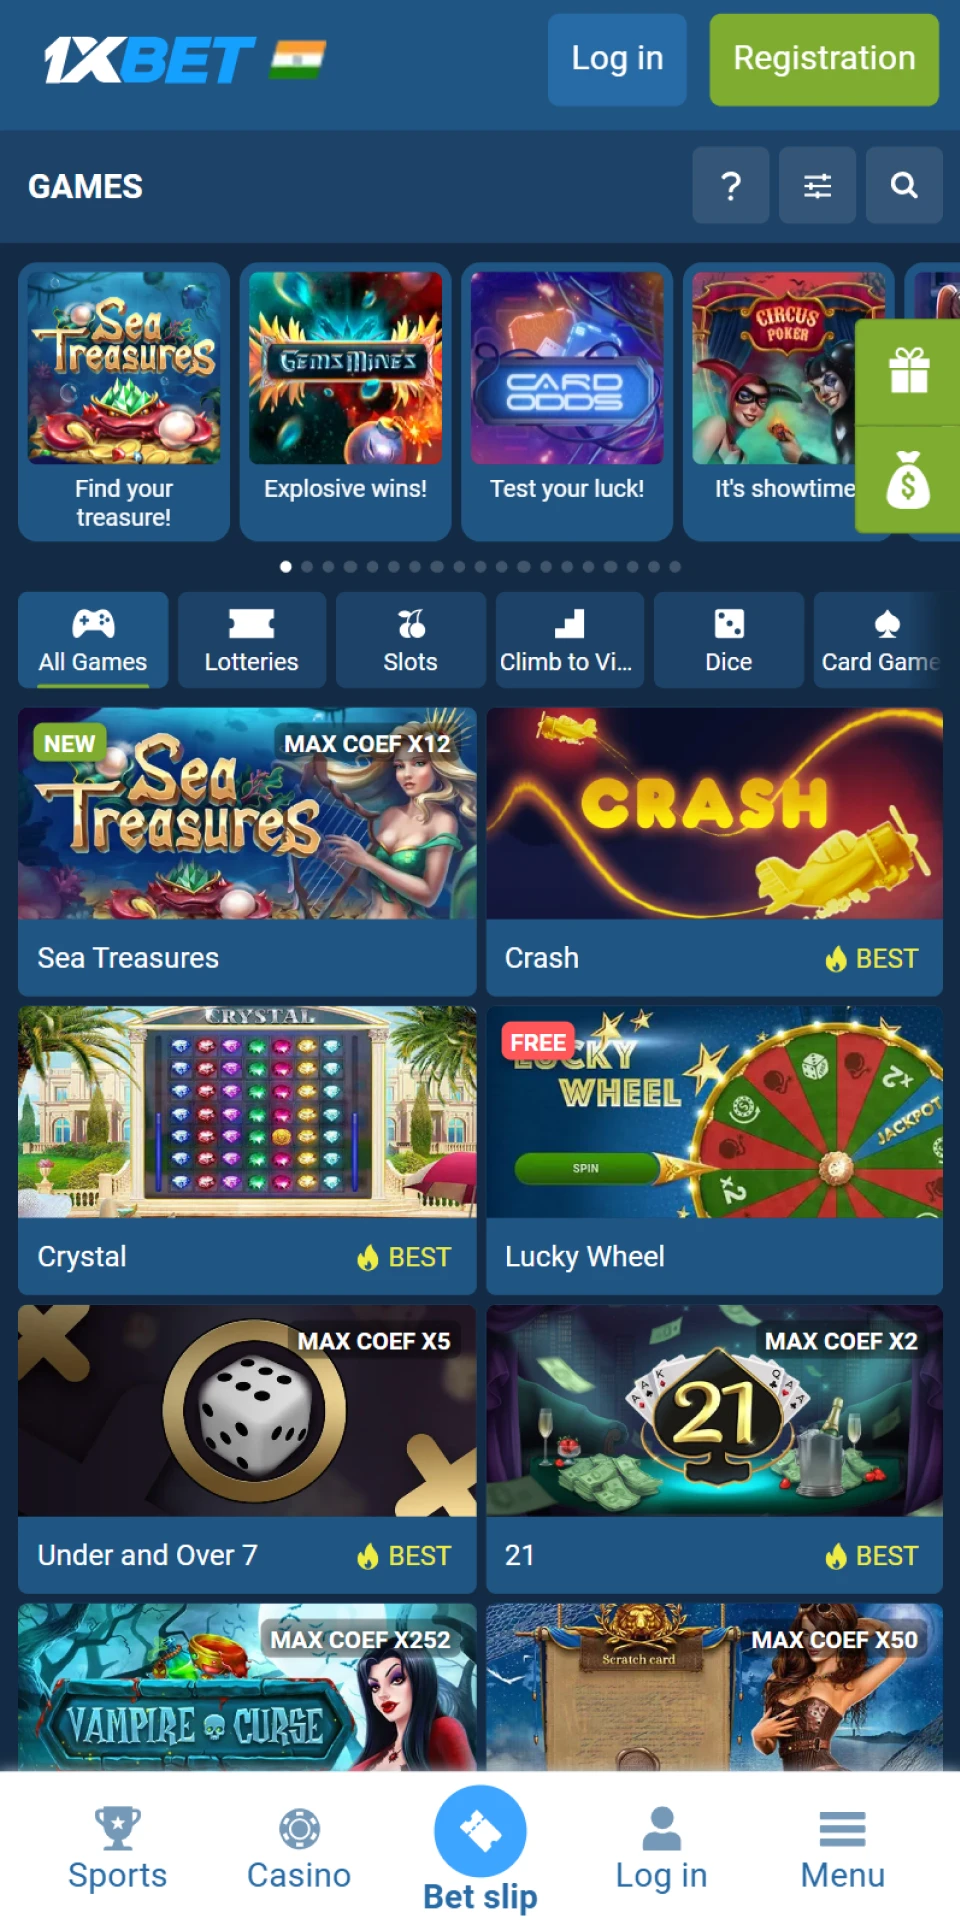 The 1xBet app has a variety of casino games such as slots, live casino, etc.